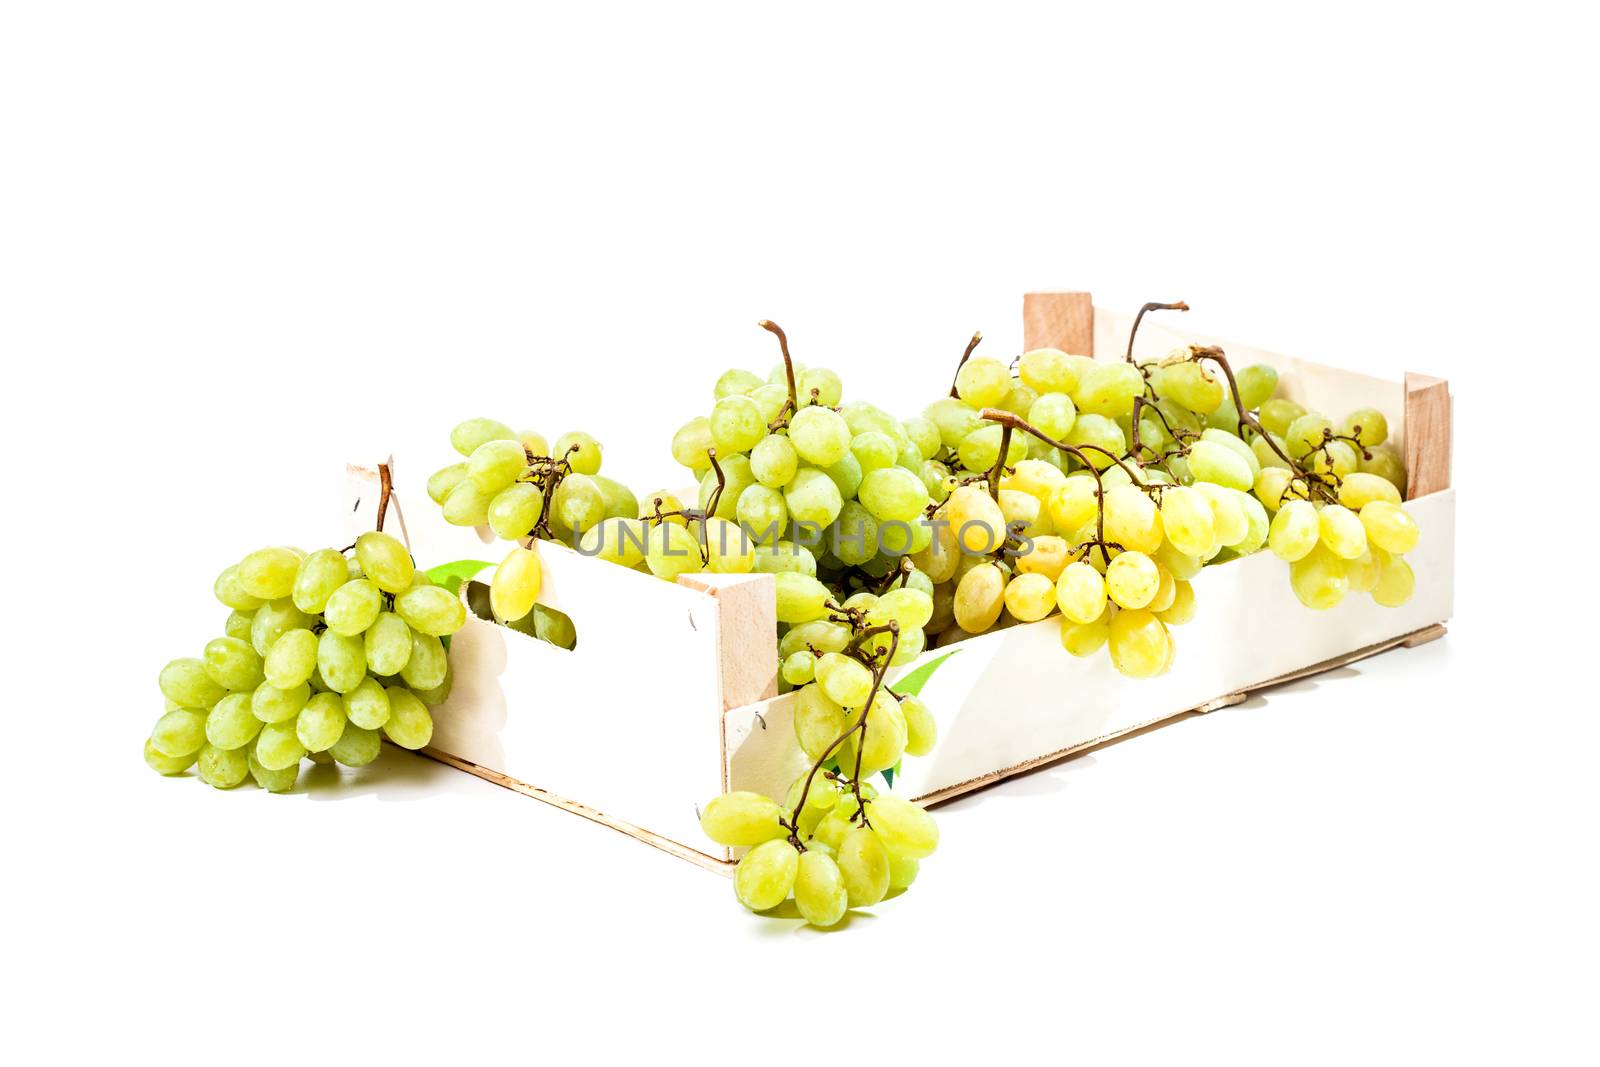 Ripe green grapes in a wooden crate box isolated